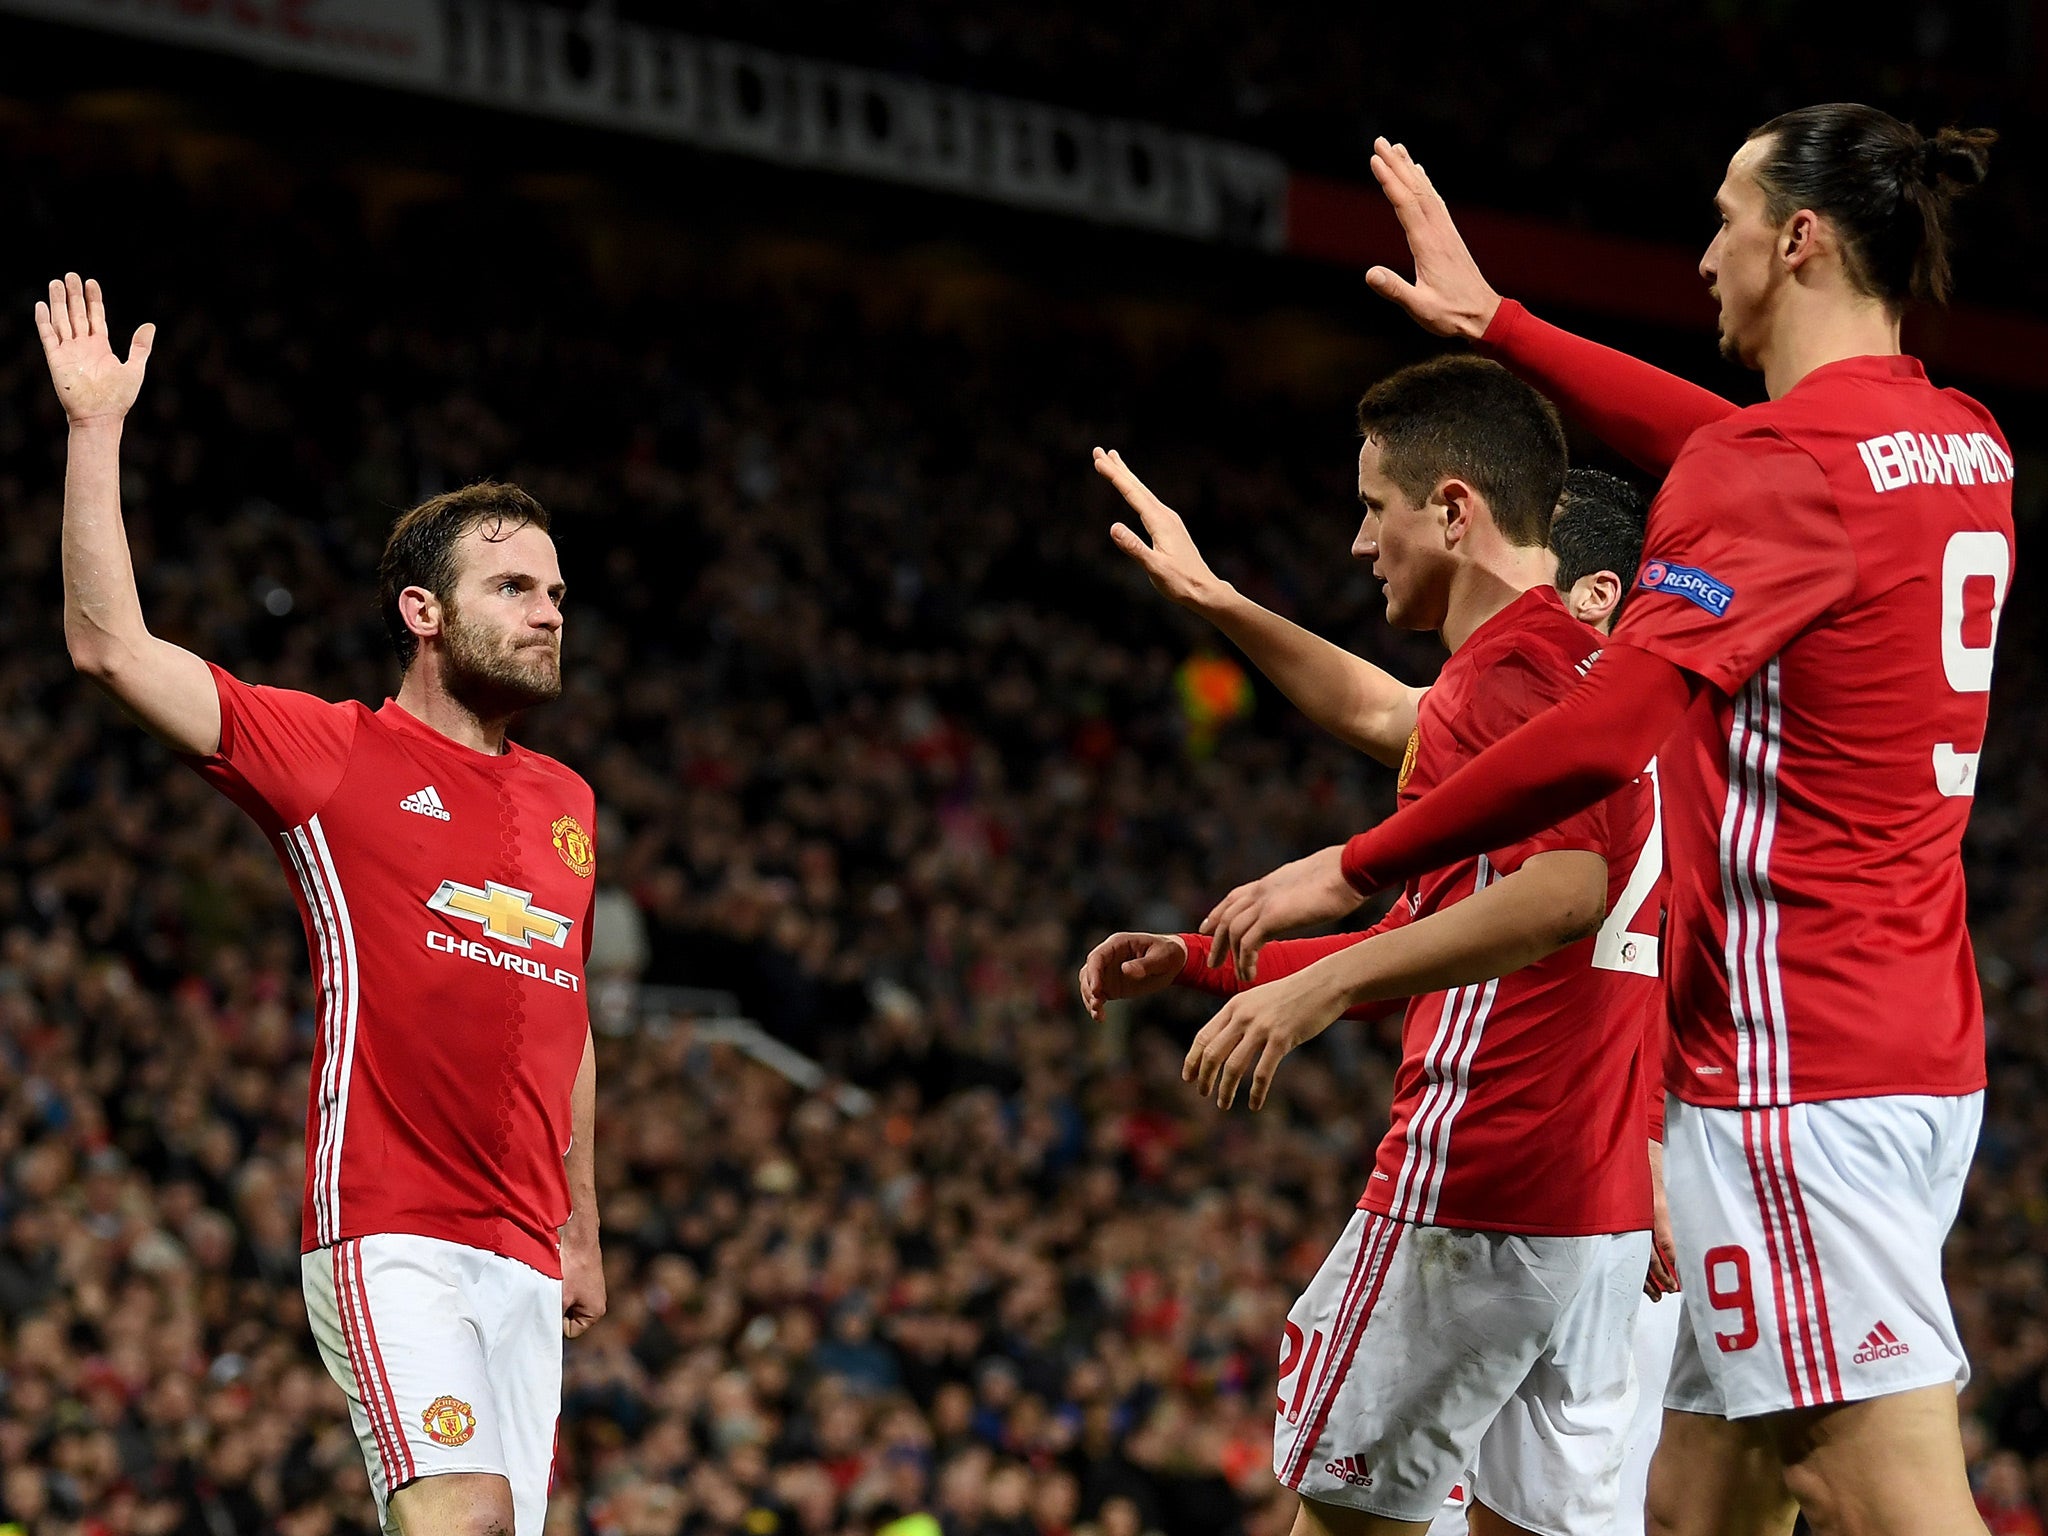 Juan Mata put an end to United's malaise by breaking the deadlock in the 70th minute